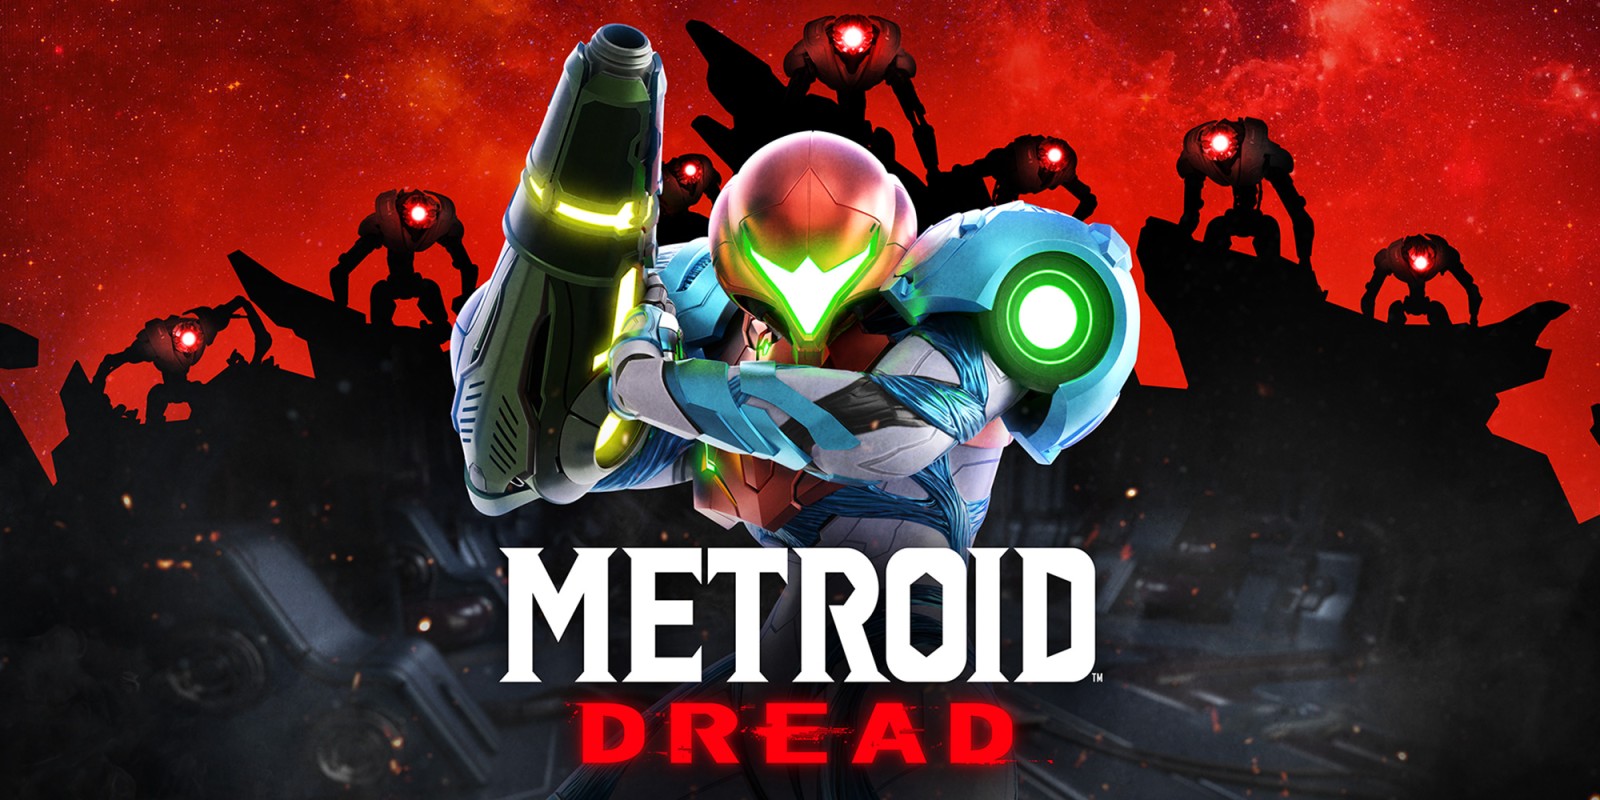 Metroid Dread gets German audio, new information on August 27 • Nintendo Connect